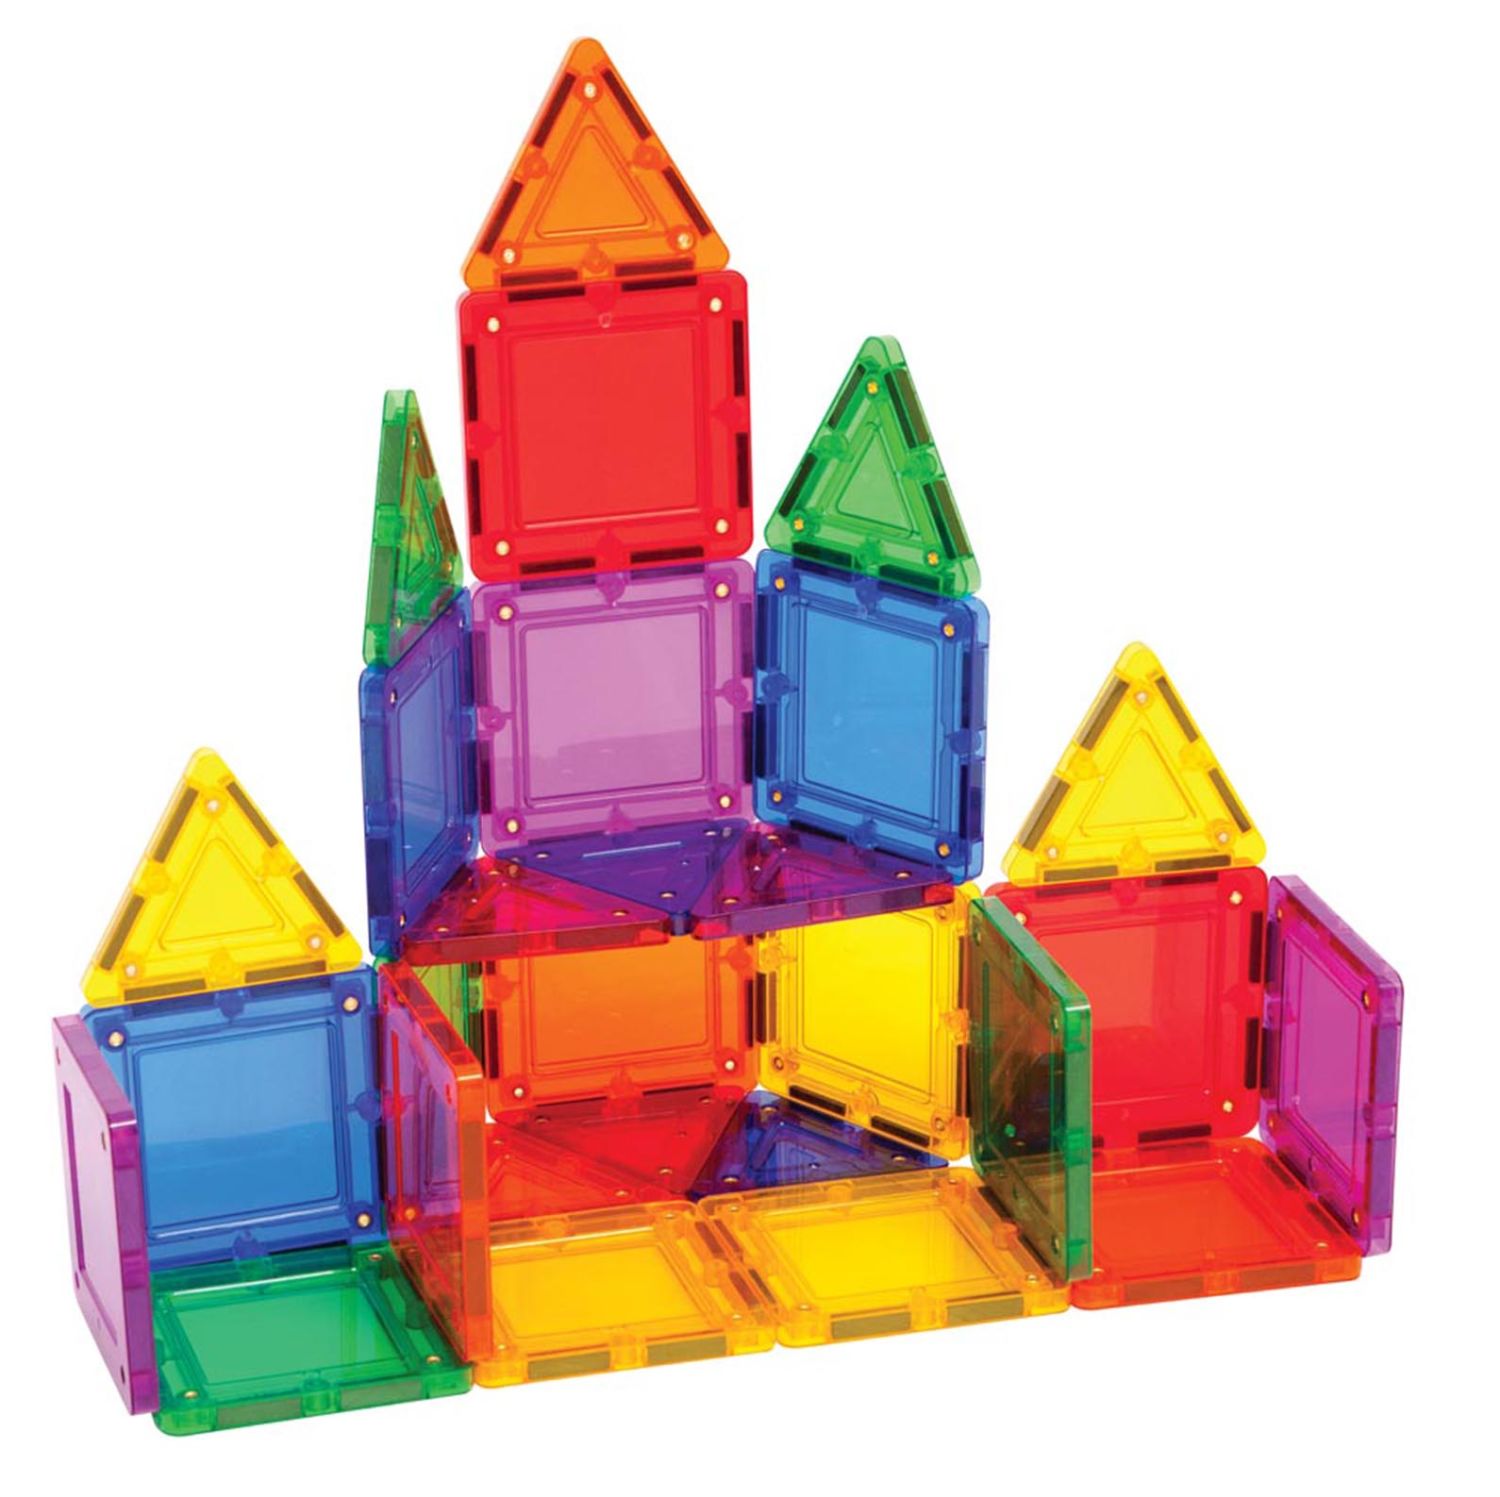 magnetic geometric shapes toy